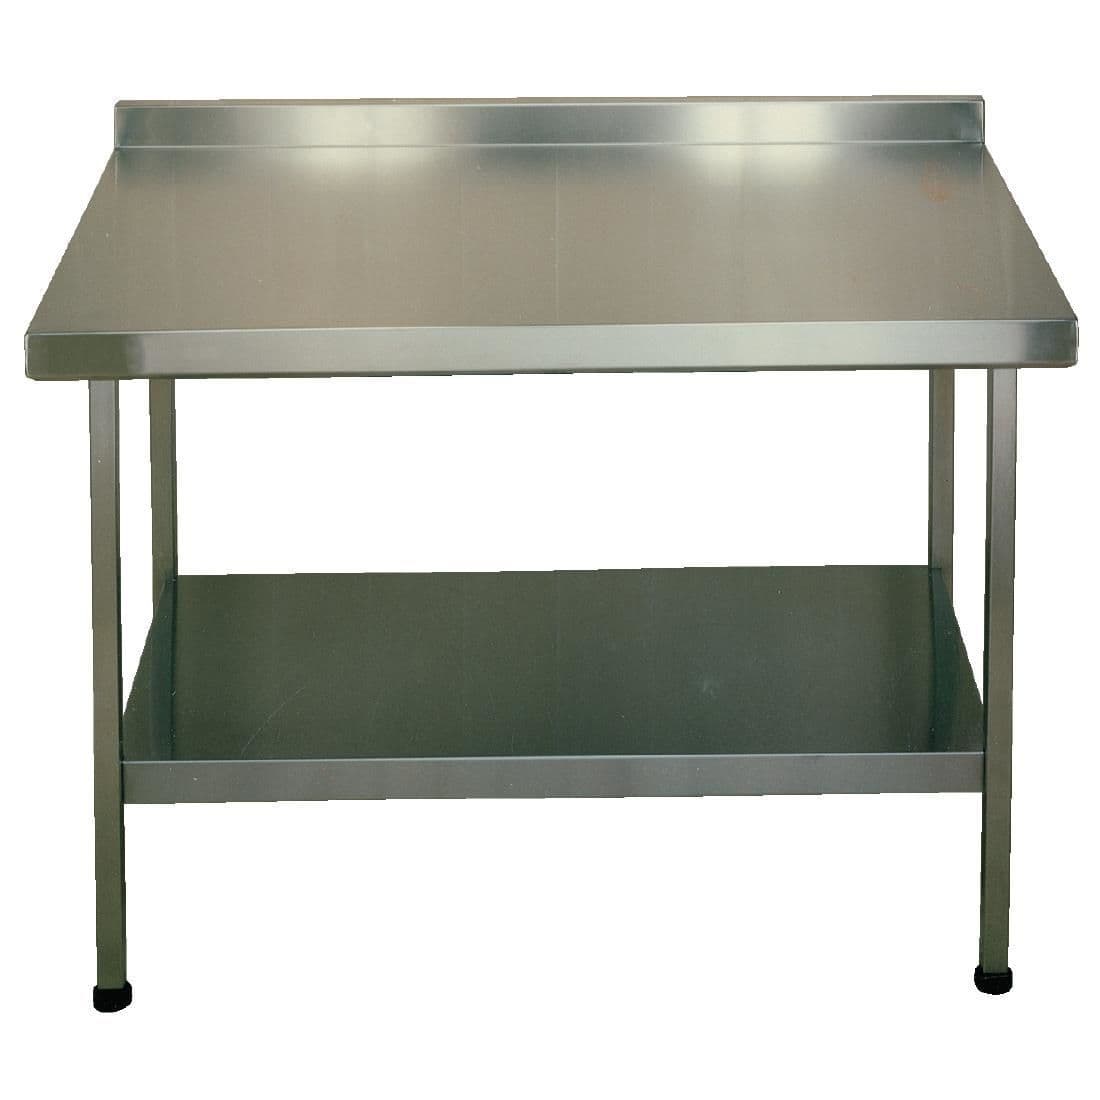 Franke Sissons Stainless Steel Wall Table with Upstand 1500x650mm JD Catering Equipment Solutions Ltd